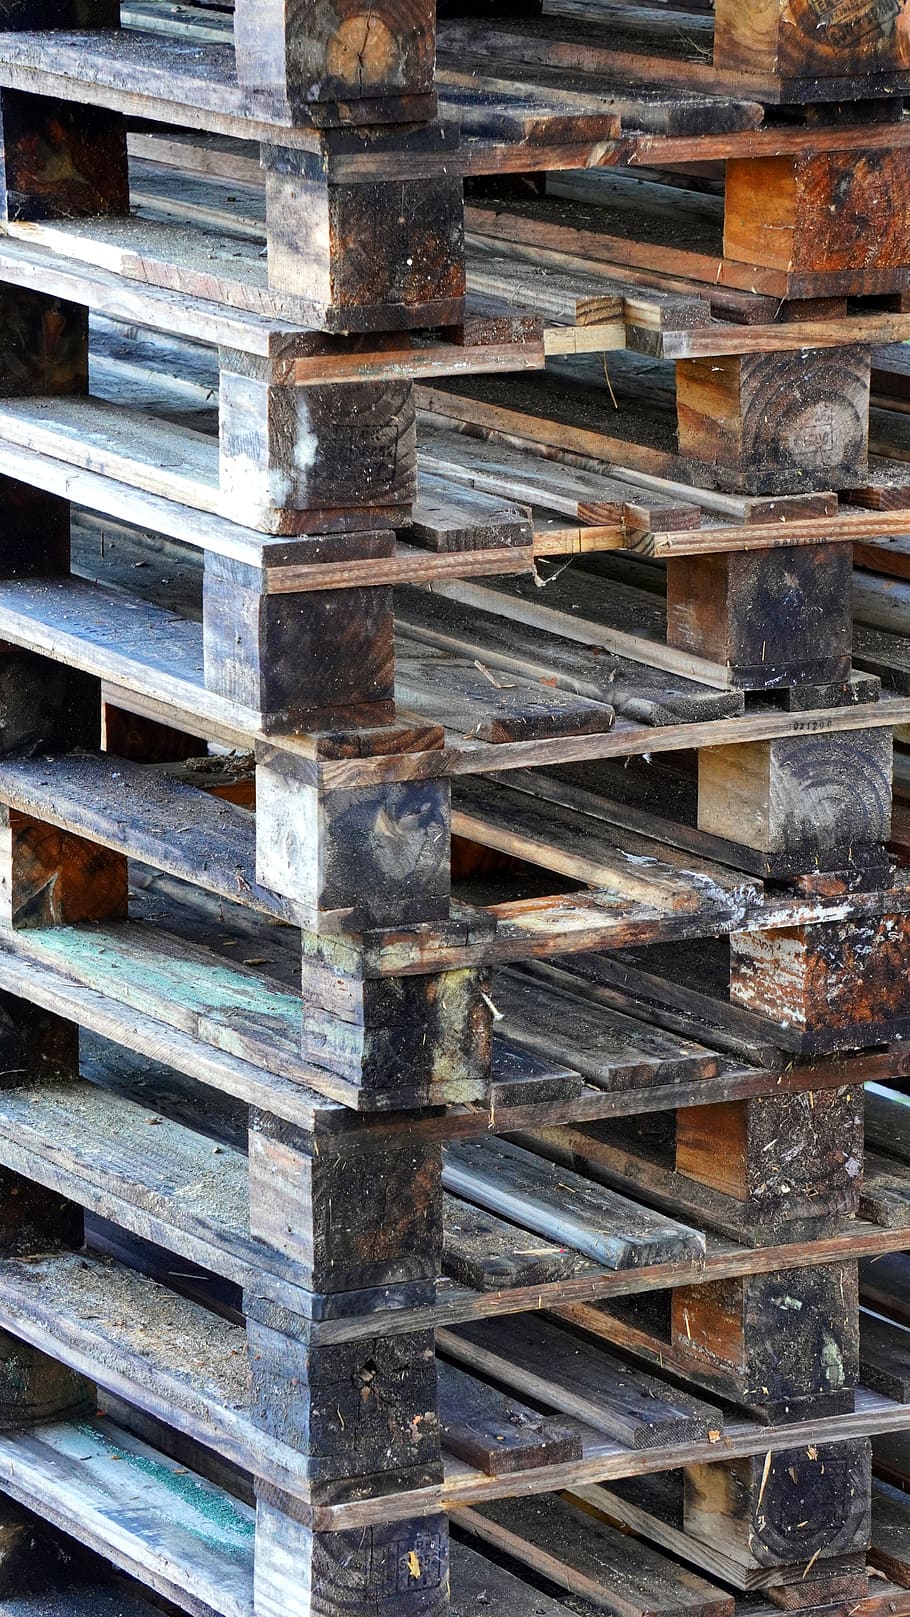 pallets, wood, euro pallets, stacked, wooden pallets, storage, stack, full frame, backgrounds, large group of objects